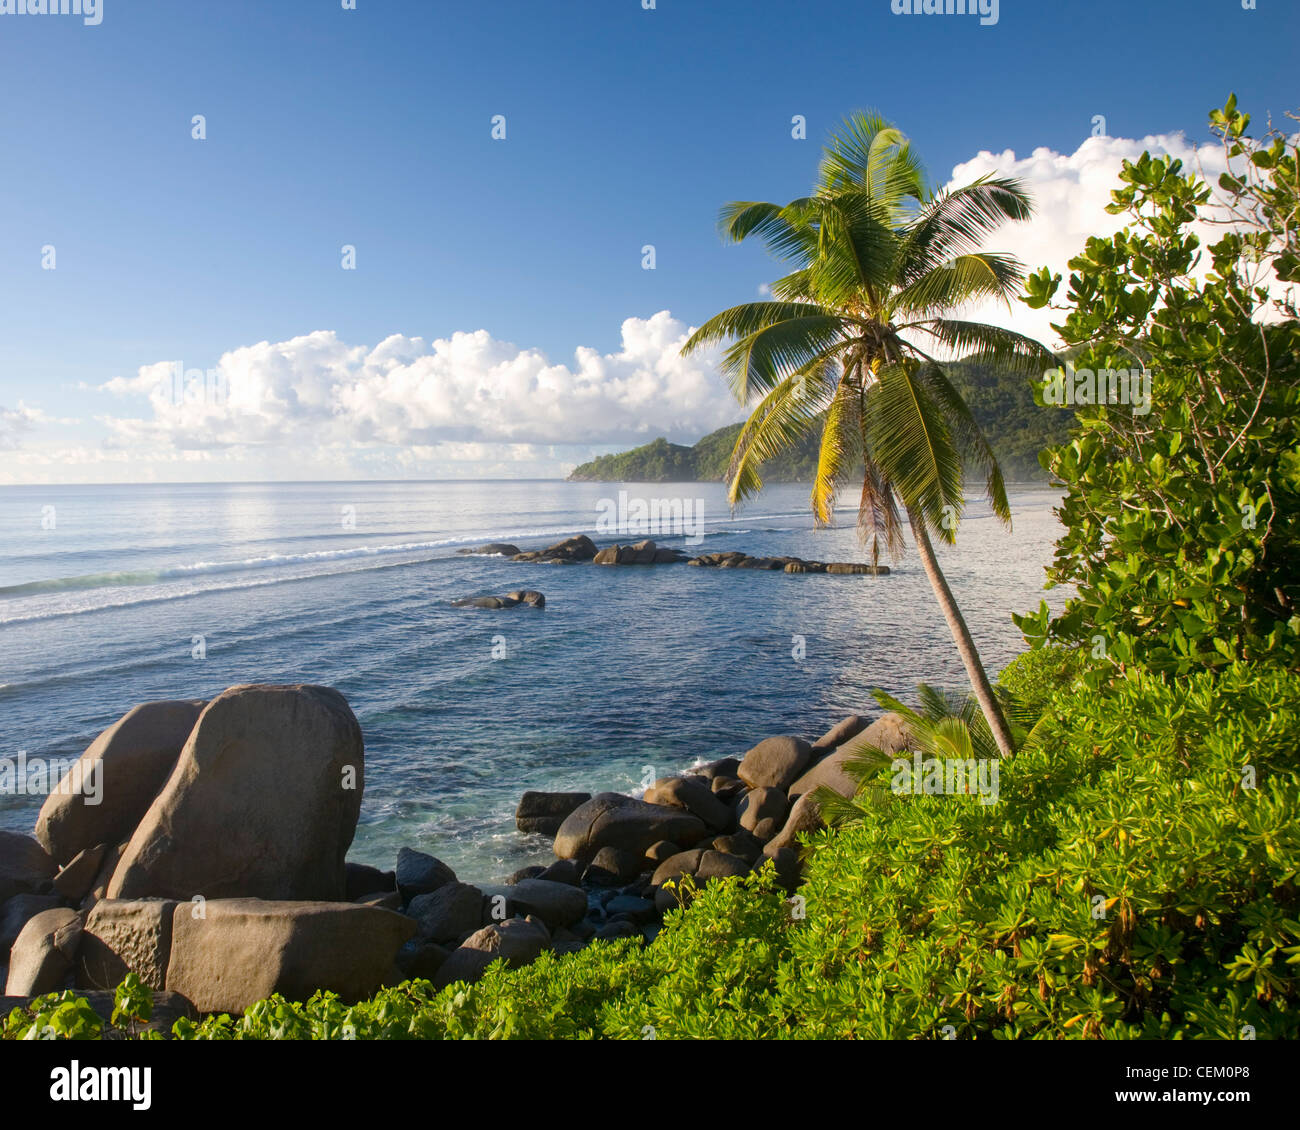 Cap Lascars, Mahé, Seychelles. View across Anse Forbans, palm-tree in foreground. Stock Photo